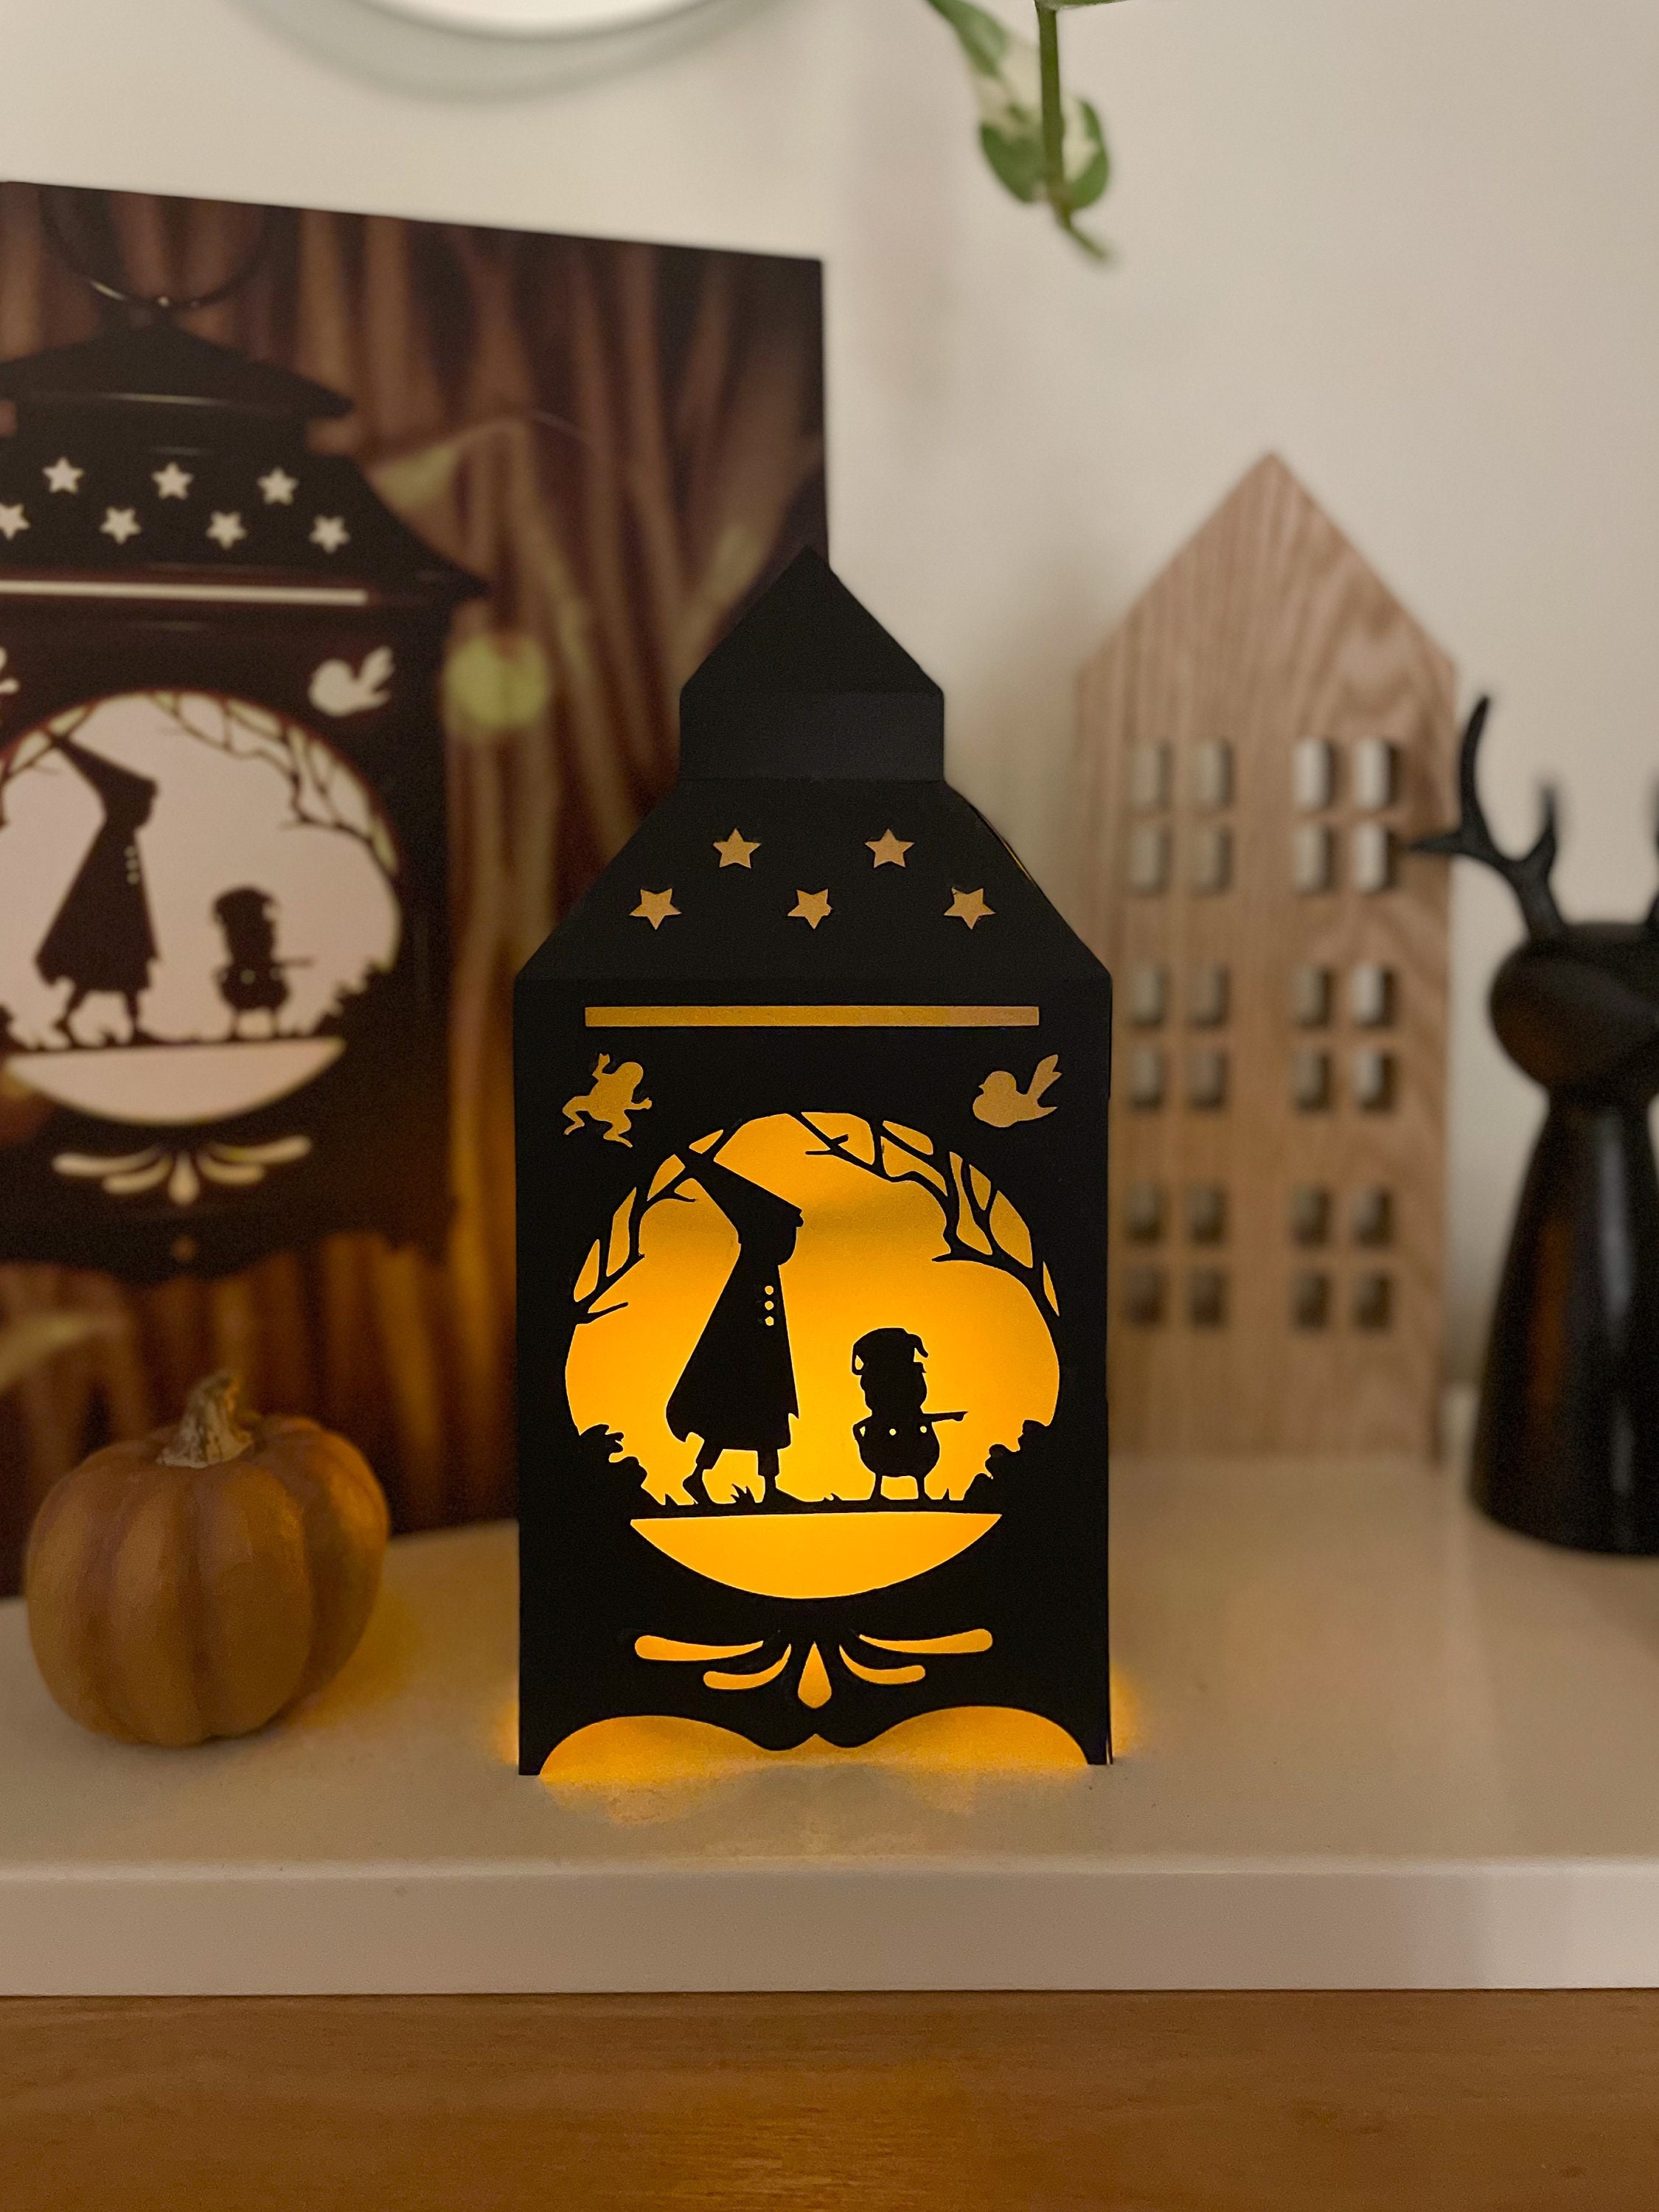 I know it's not very original, but I made a lantern. : r/overthegardenwall